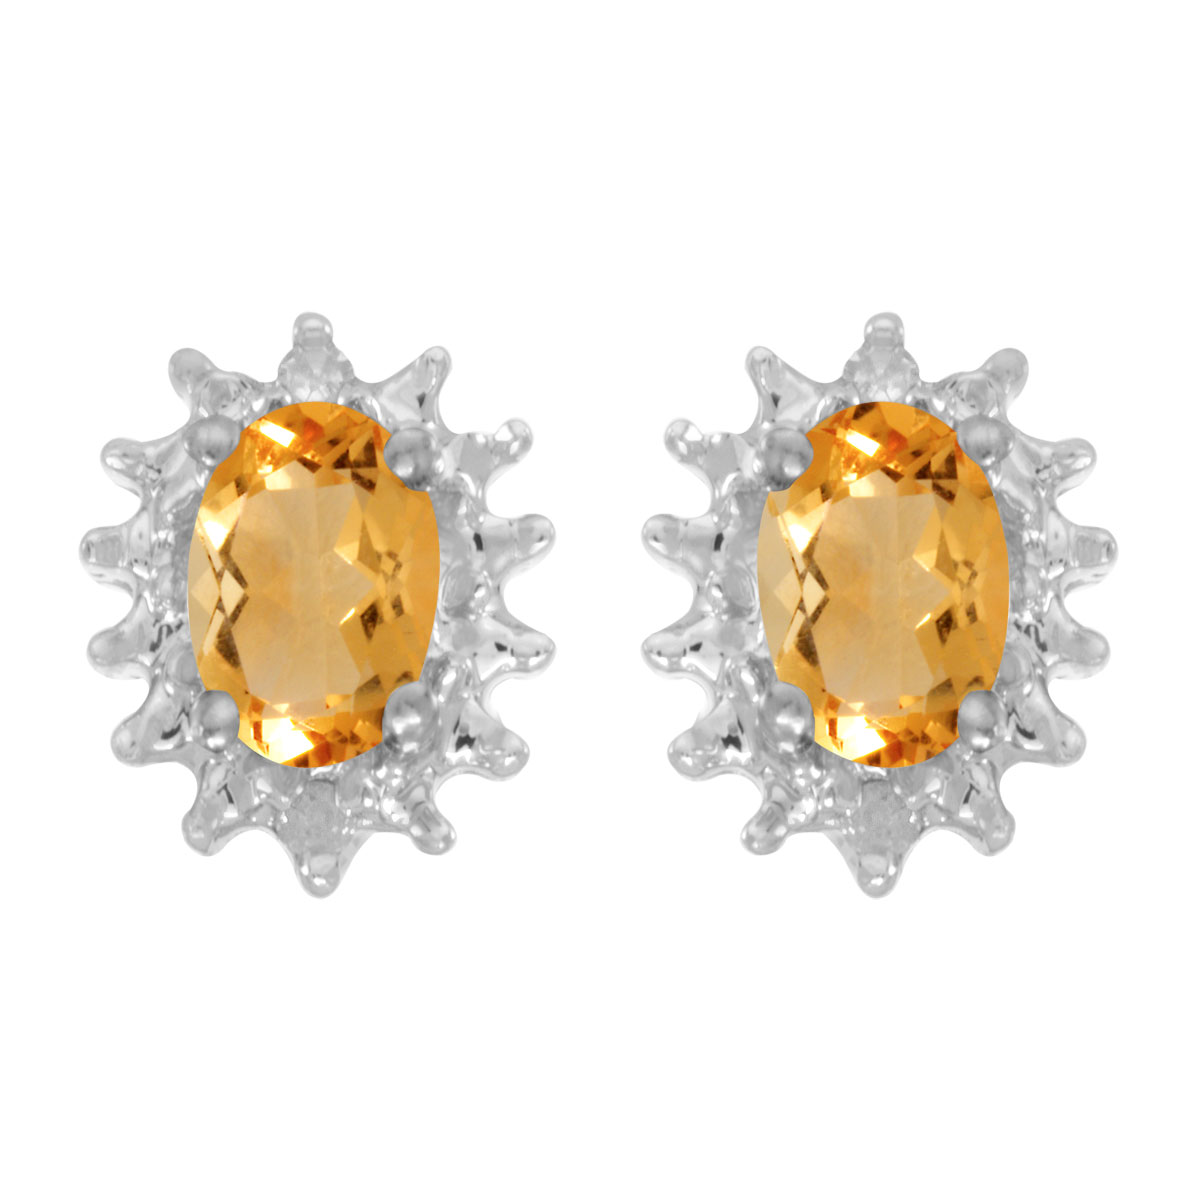 JCX2011: These 14k white gold oval citrine and diamond earrings feature 6x4 mm genuine natural citrines with a 0.62 ct total weight and .04 ct diamonds.